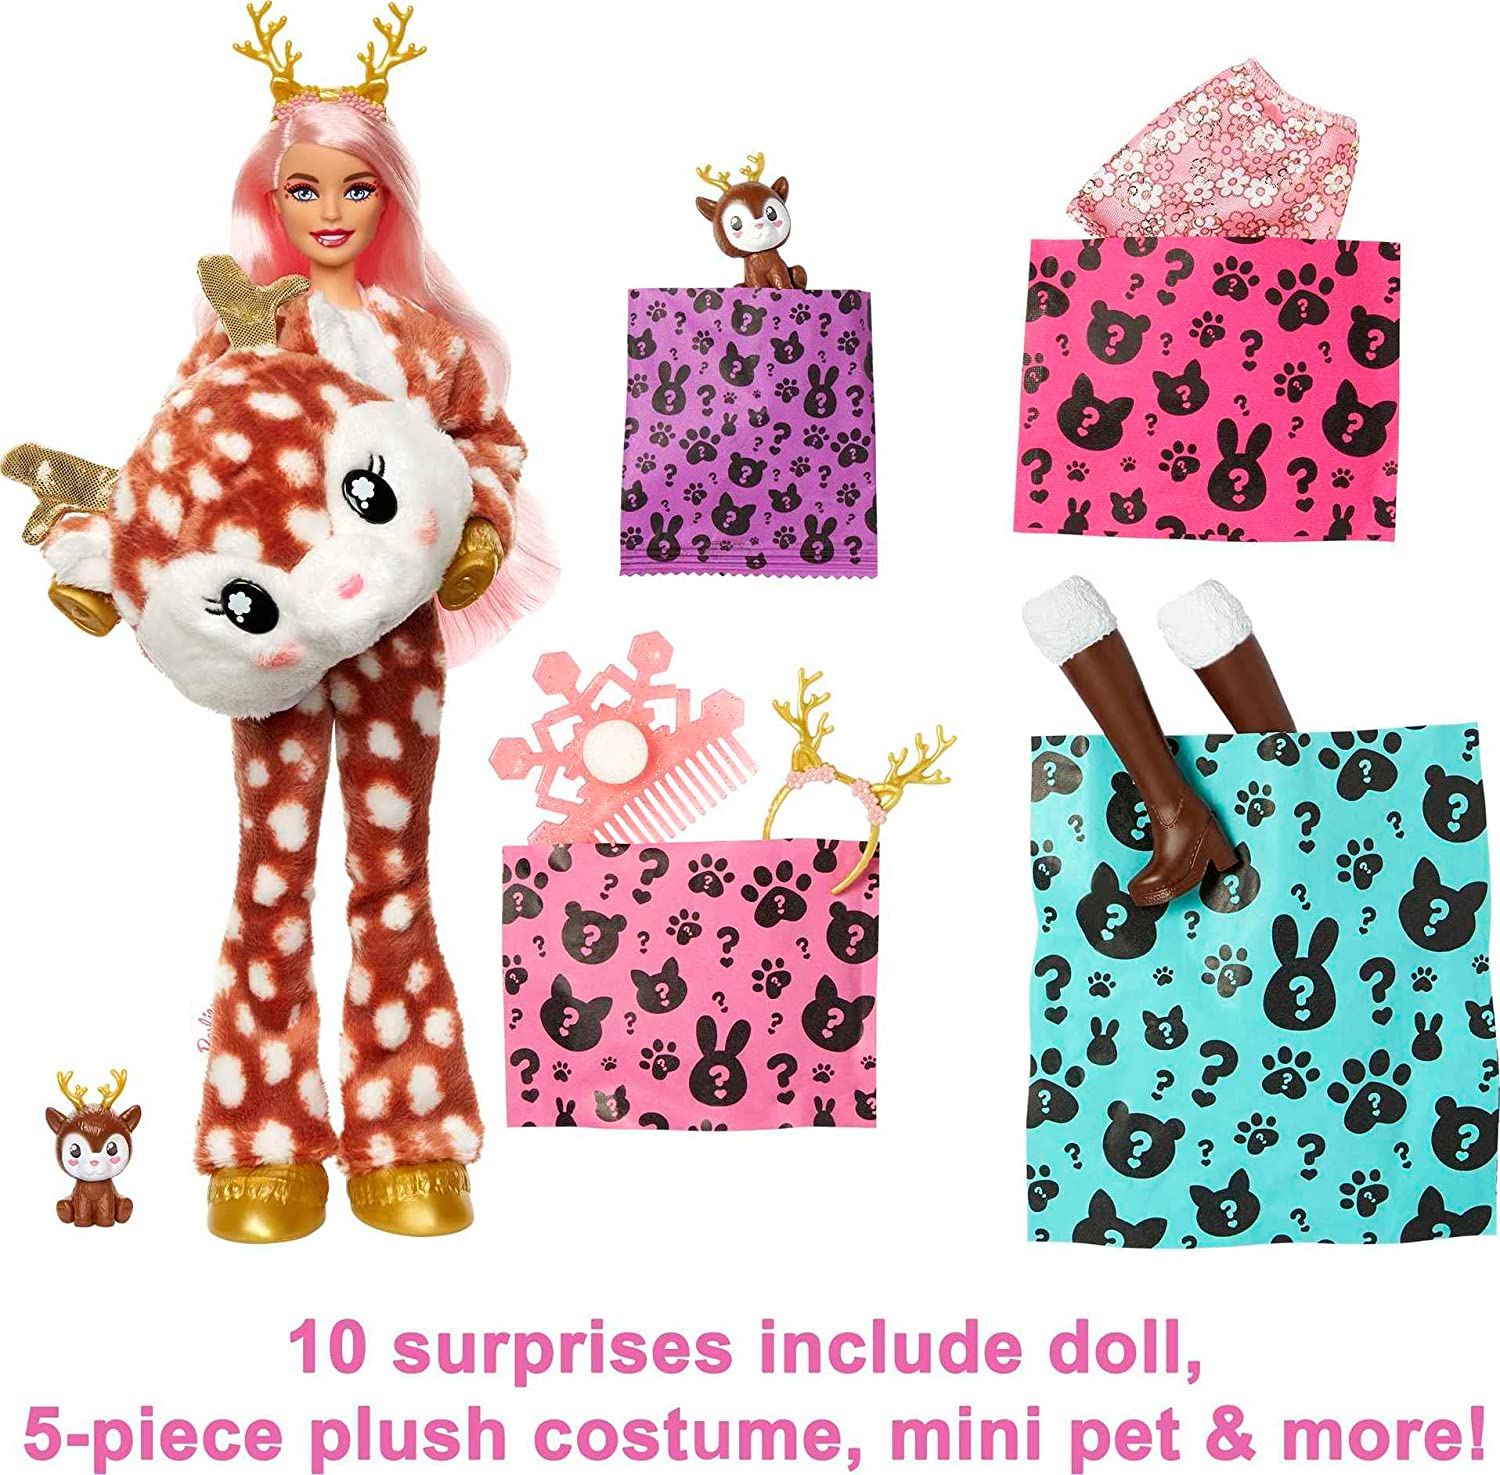 Barbie Doll, Cutie Reveal Bunny Plush Costume Doll with 10 Surprises, Mini Pet, Color Change and Accessories